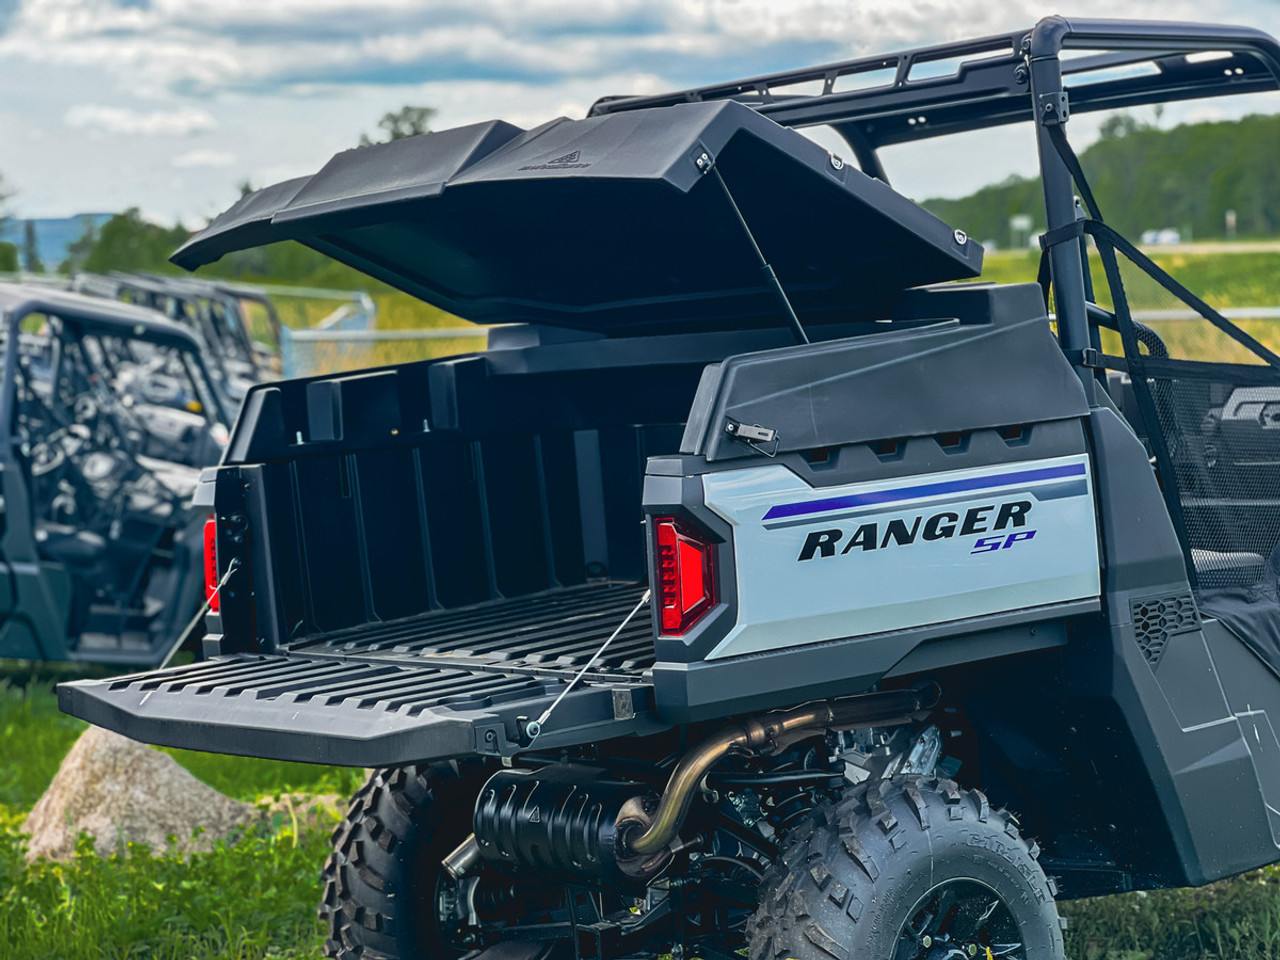 Highlands Polaris Ranger 570 UTV Cargo Bed Cover installed open with tail gate down